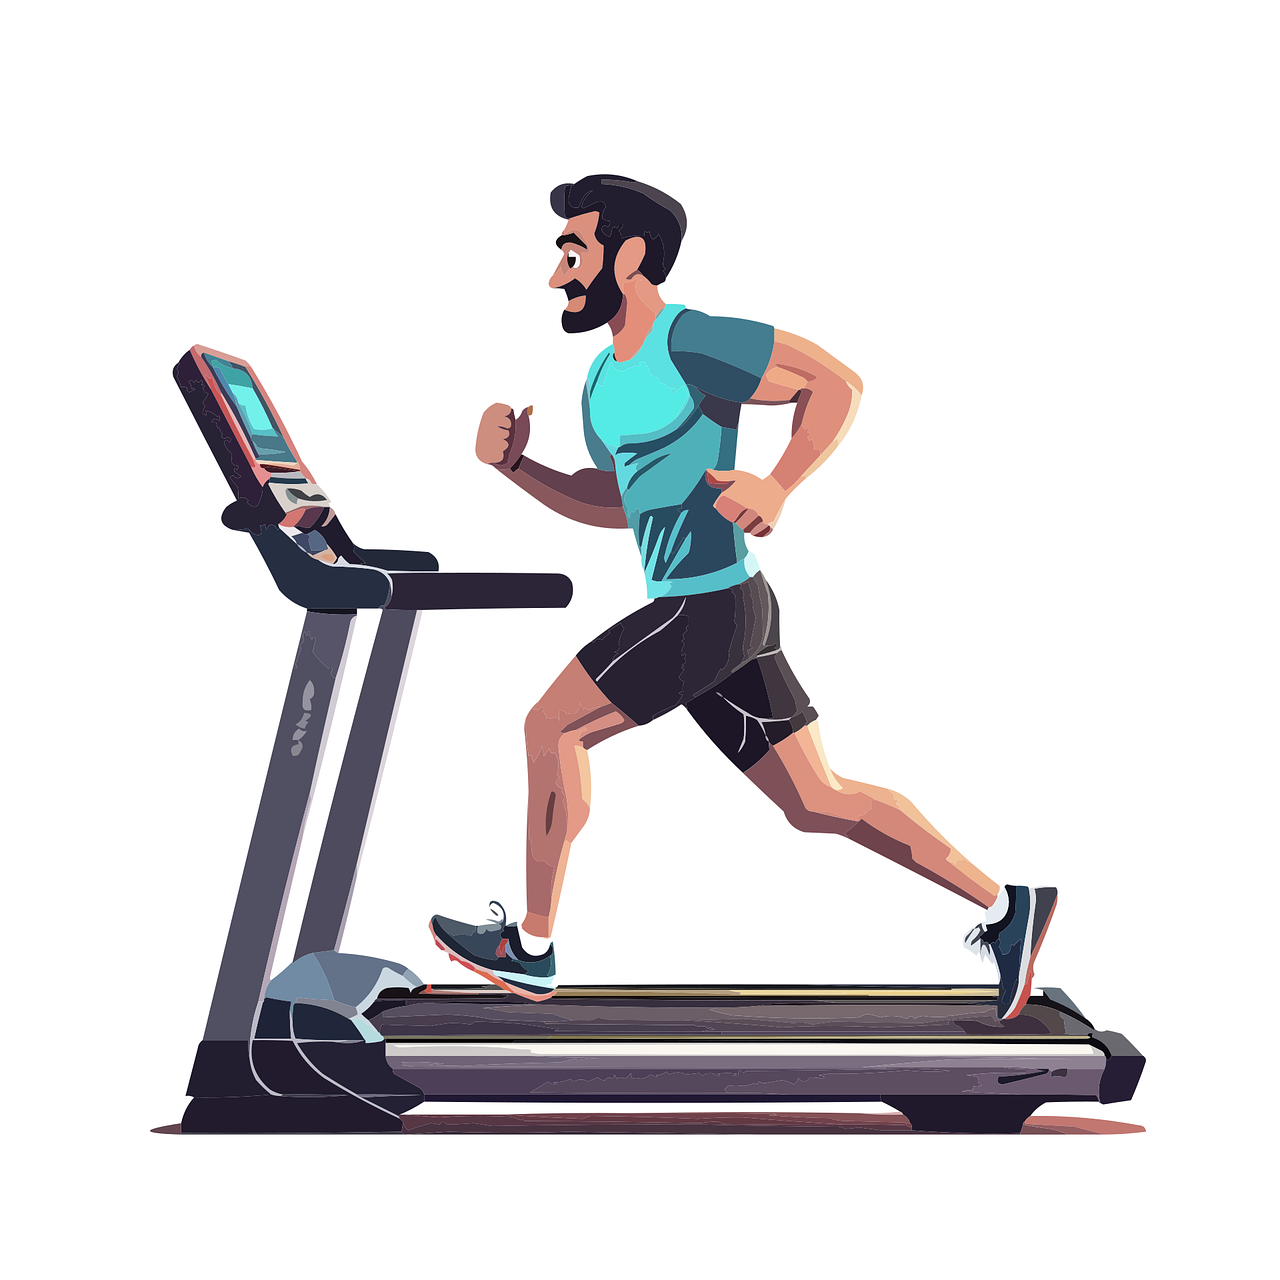 Dip Gym Machine: Features, Cost, and Summary